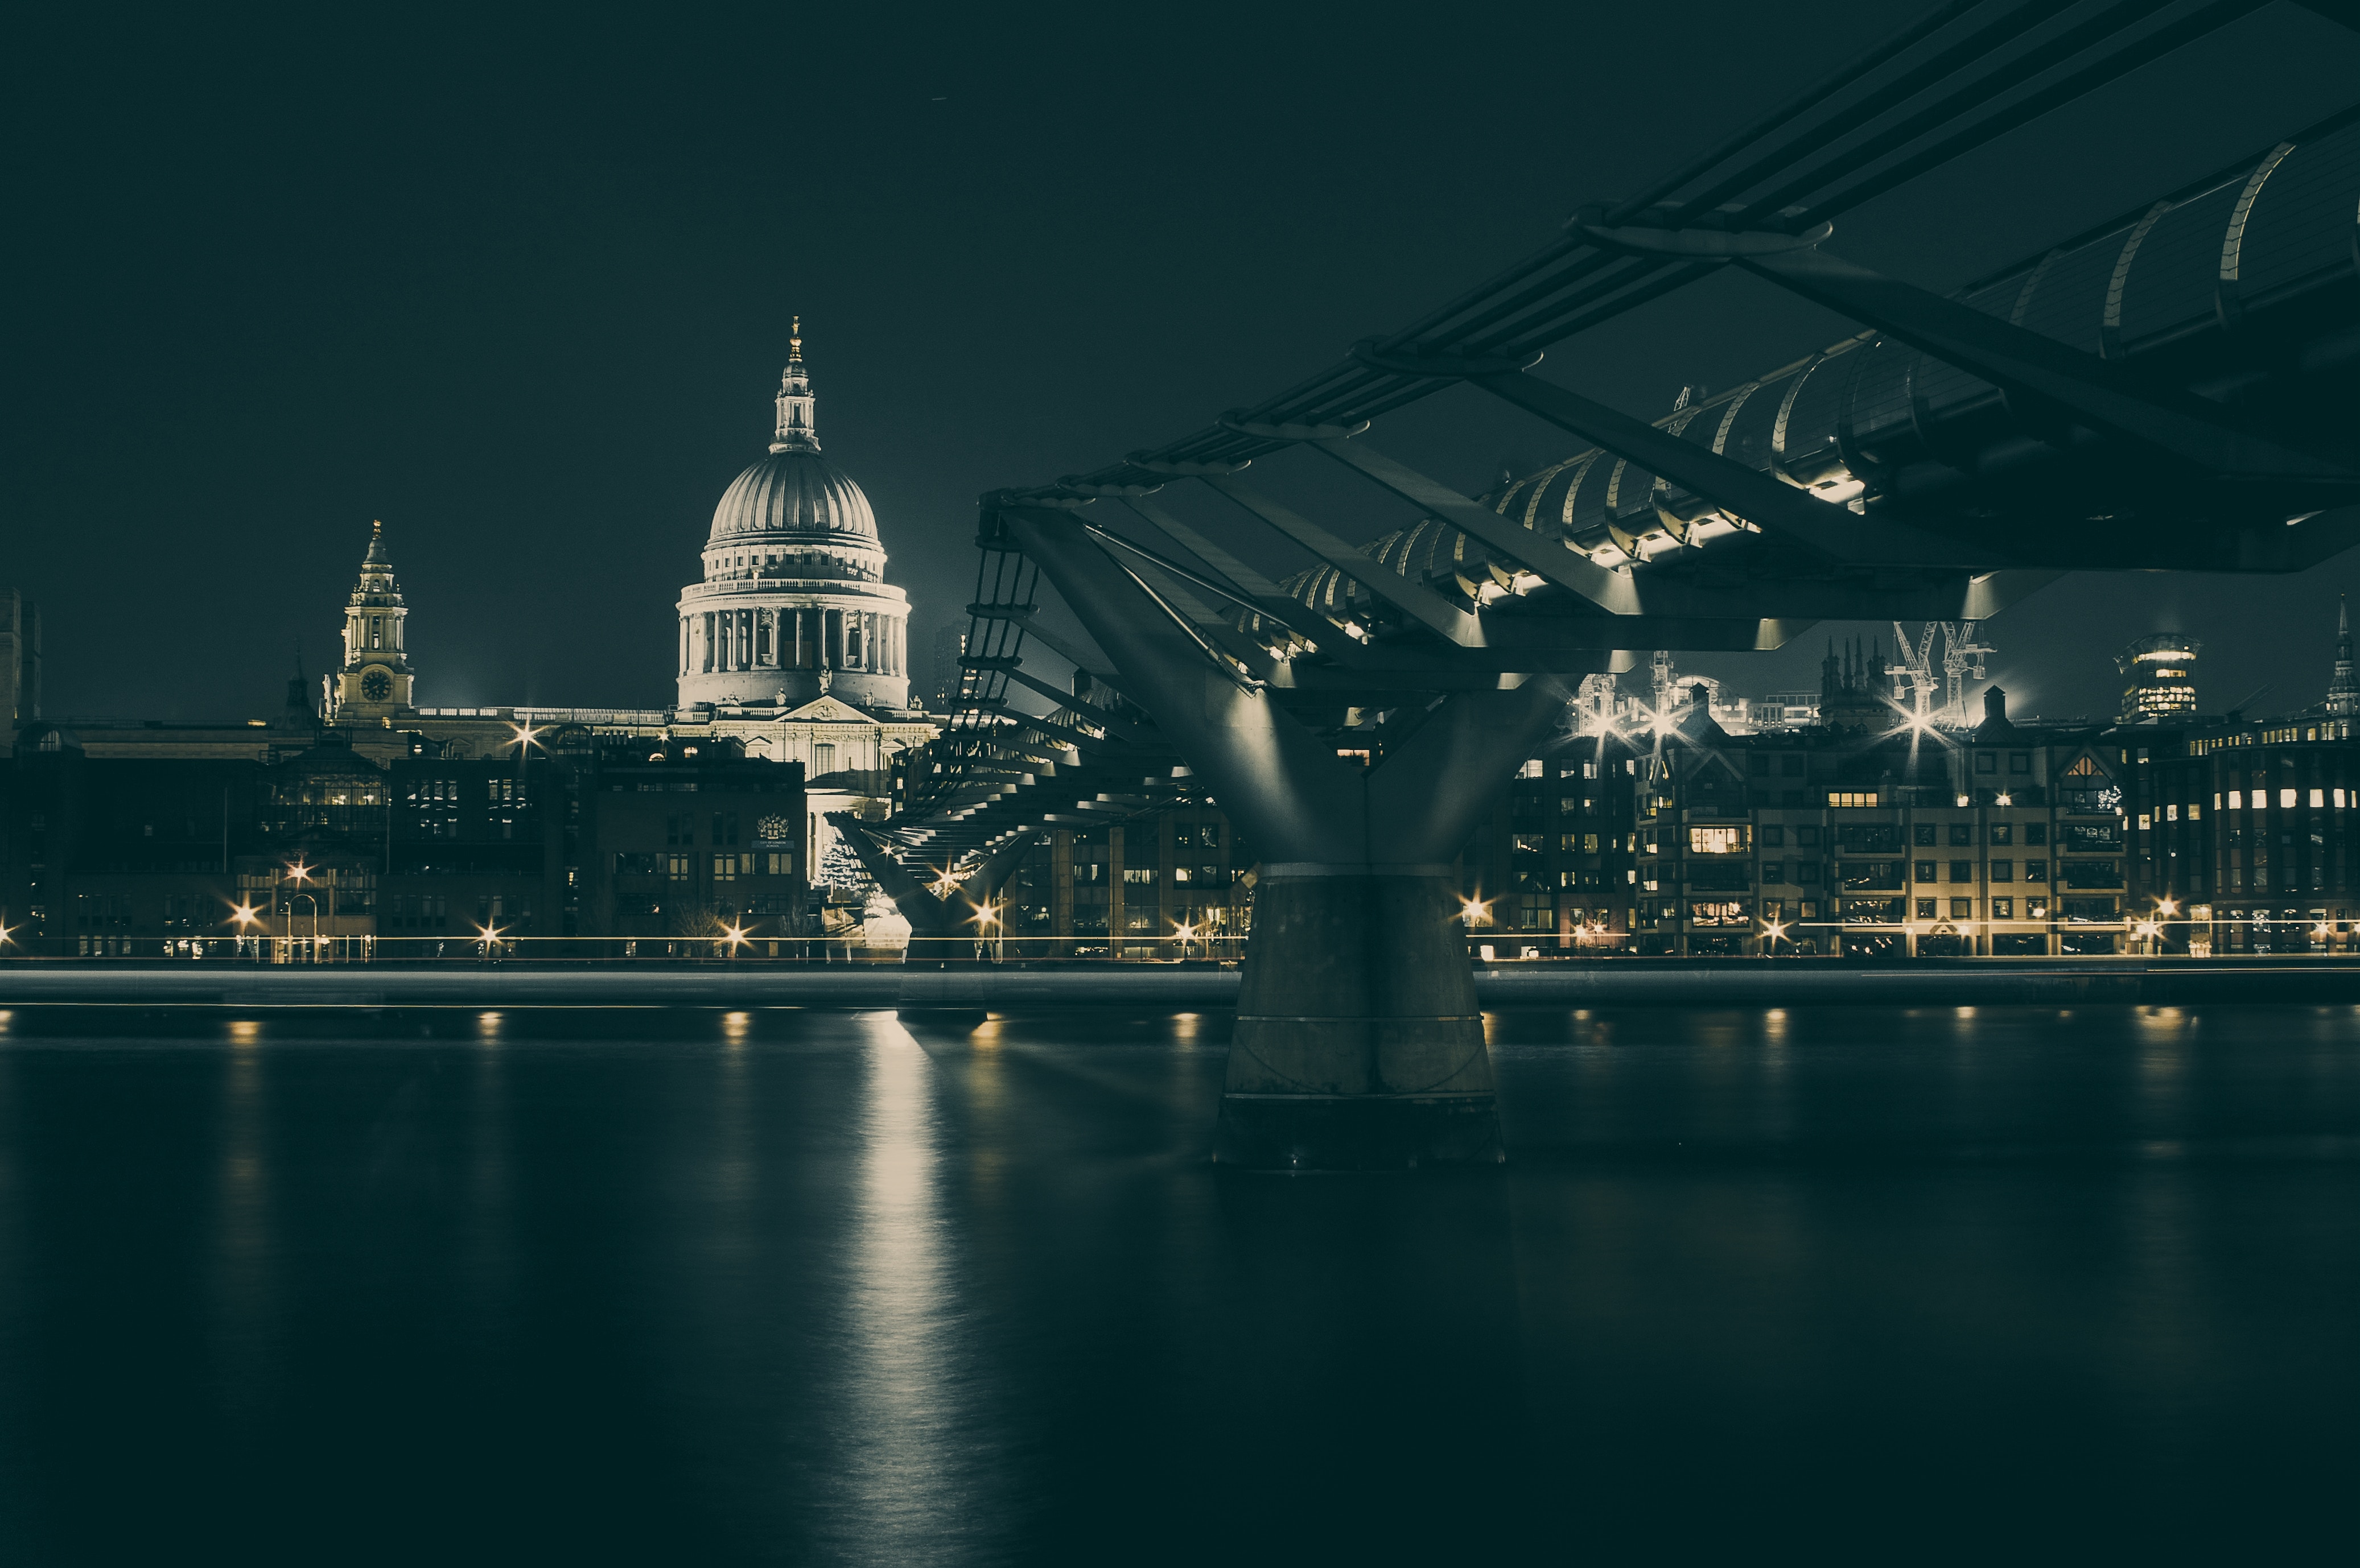 Washington, D.C. at night | During the partial federal government shutdown, many homebuyers and sellers in Washington, D.C. had to hold off making moves in the local real estate market due to financial uncertainty and a lack of affordability.